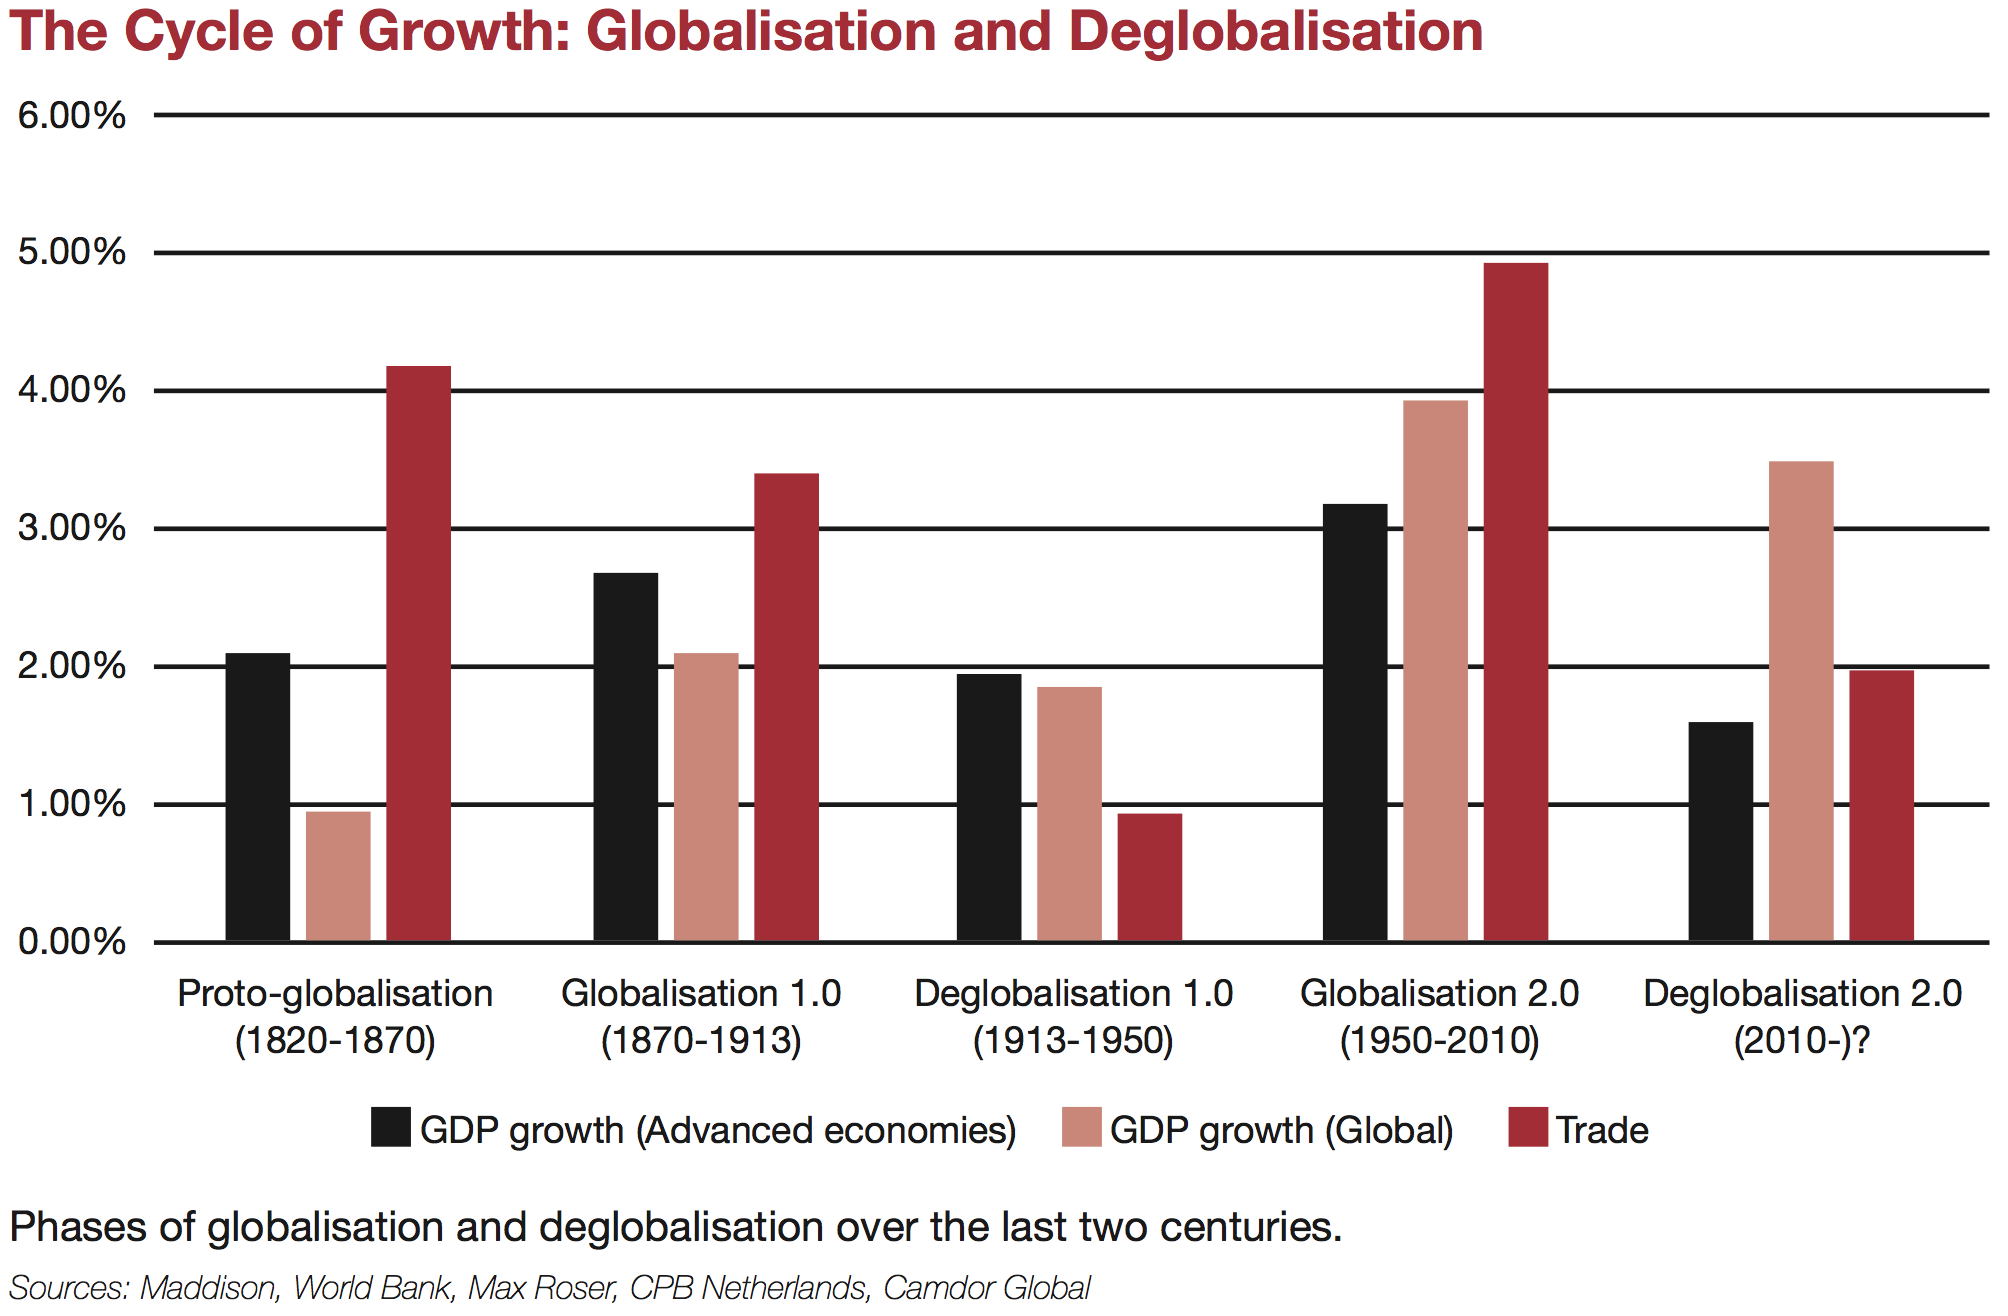 The Cycle of Growth: Globalisation and Deglobalisation – Phases of globalisation and deglobalisation over the last two centuries.